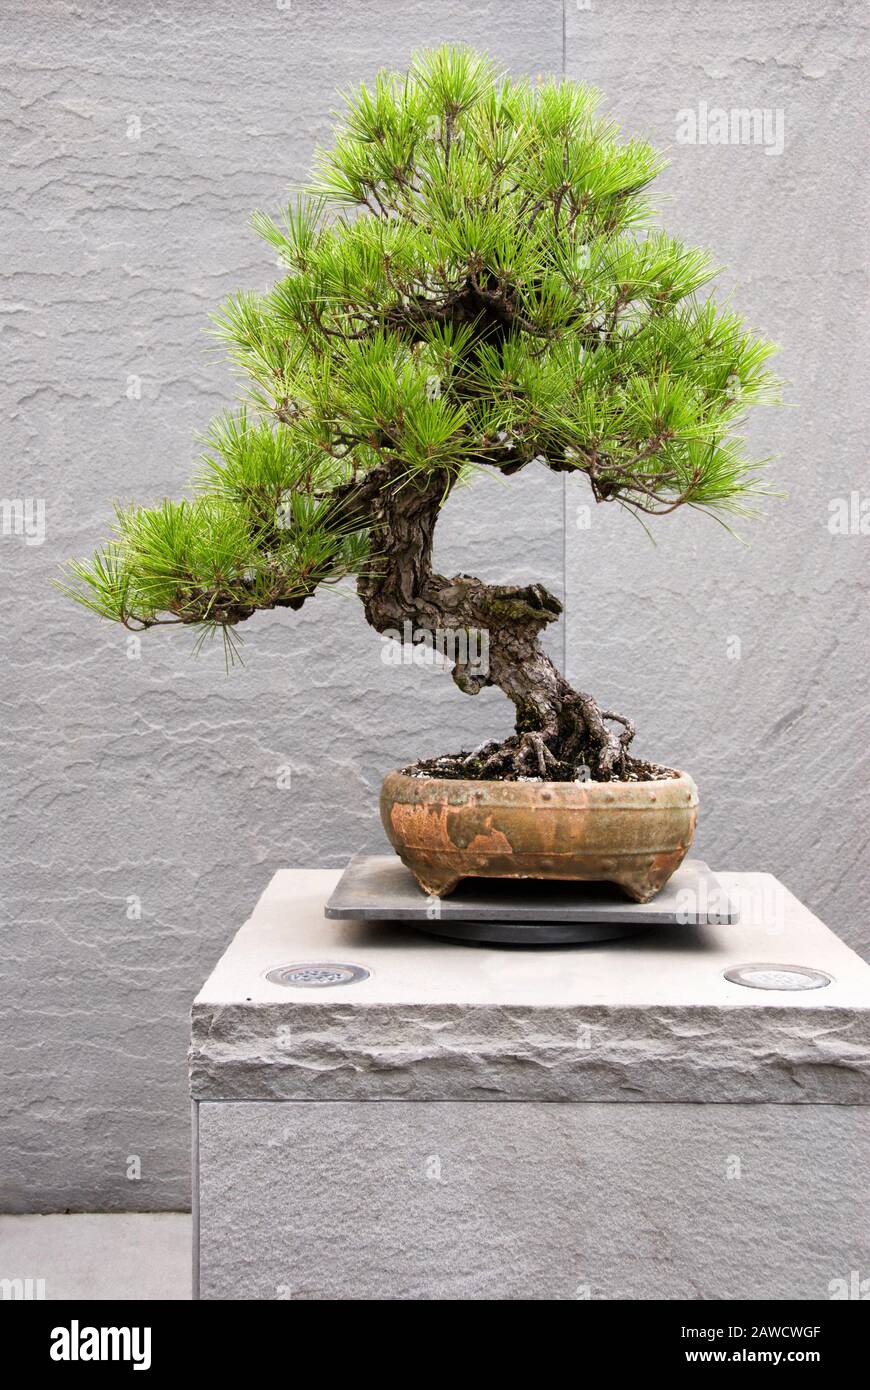 Japanese Cork Bark Black Pine bonsai tree growing in a potted container. This tree has been in training since 1936. Stock Photo